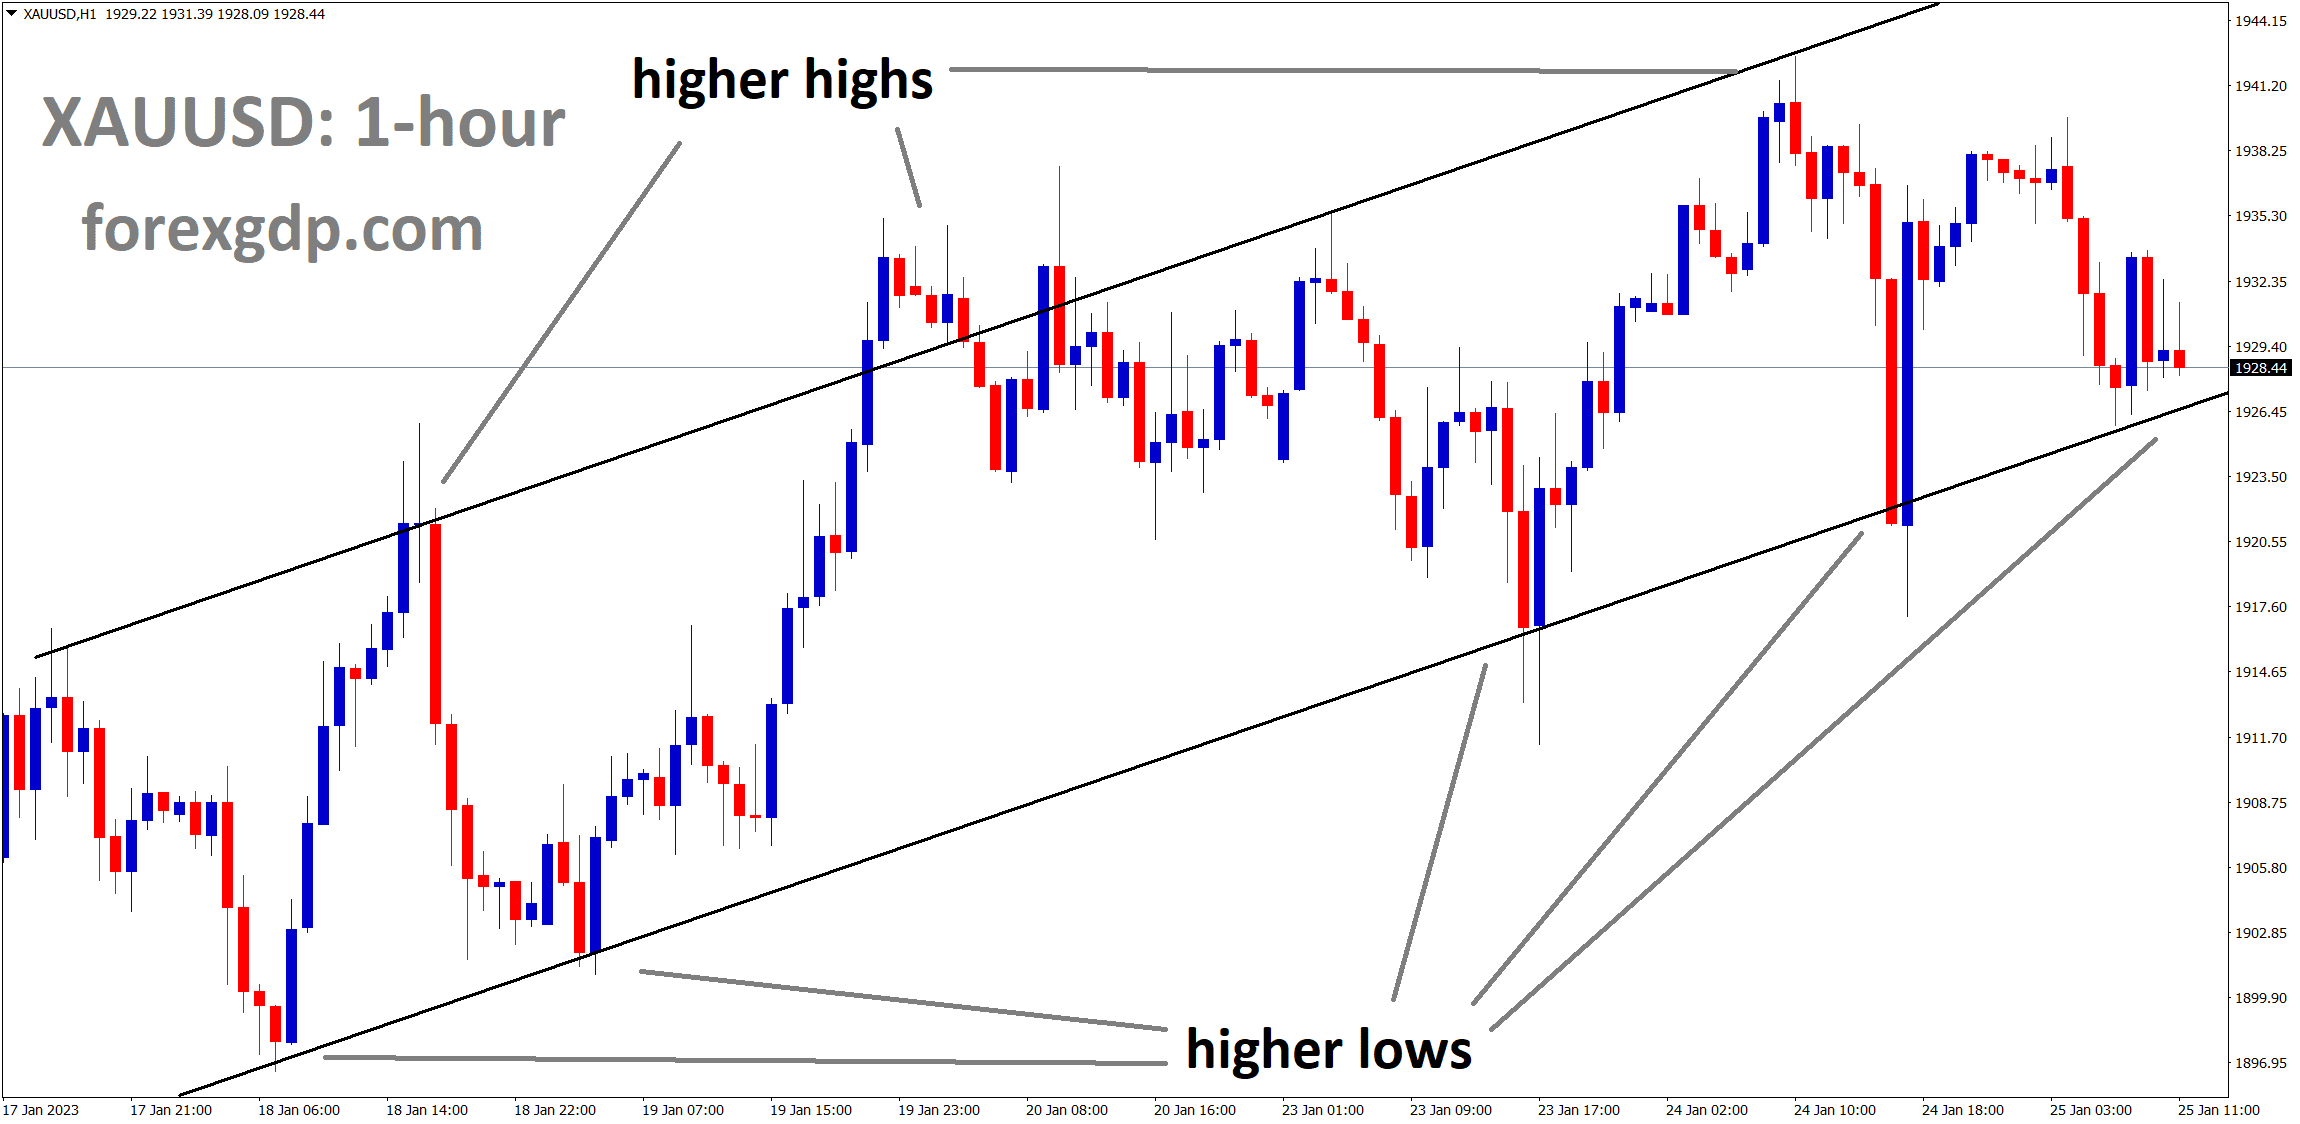 XAUUSD is moving in Ascending channel and the market has reached the higher low area of the channel.